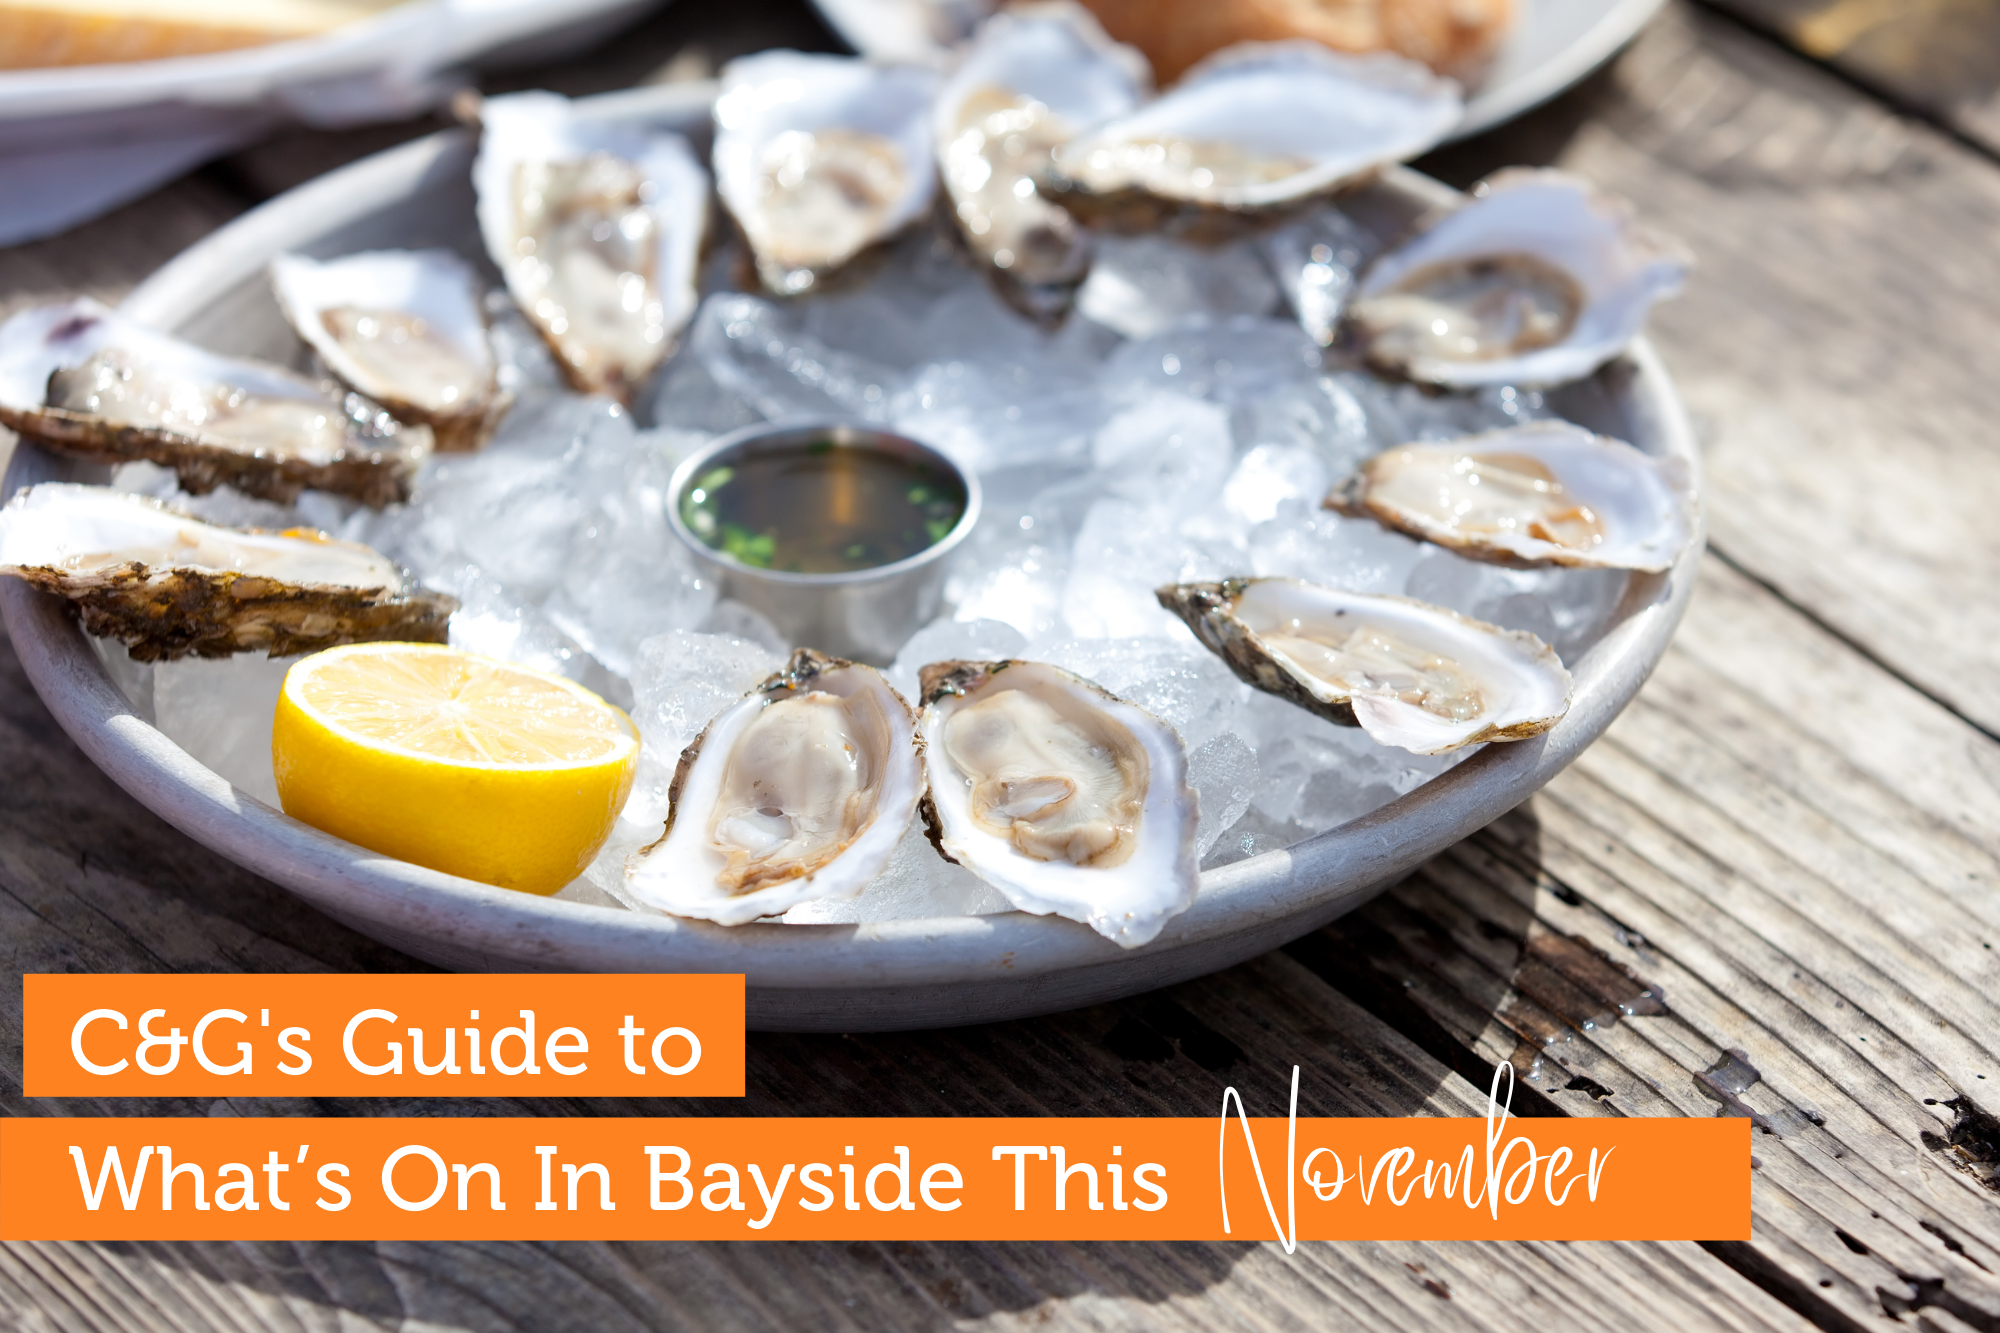 C&G’s Guide To: What’s On In Bayside This November